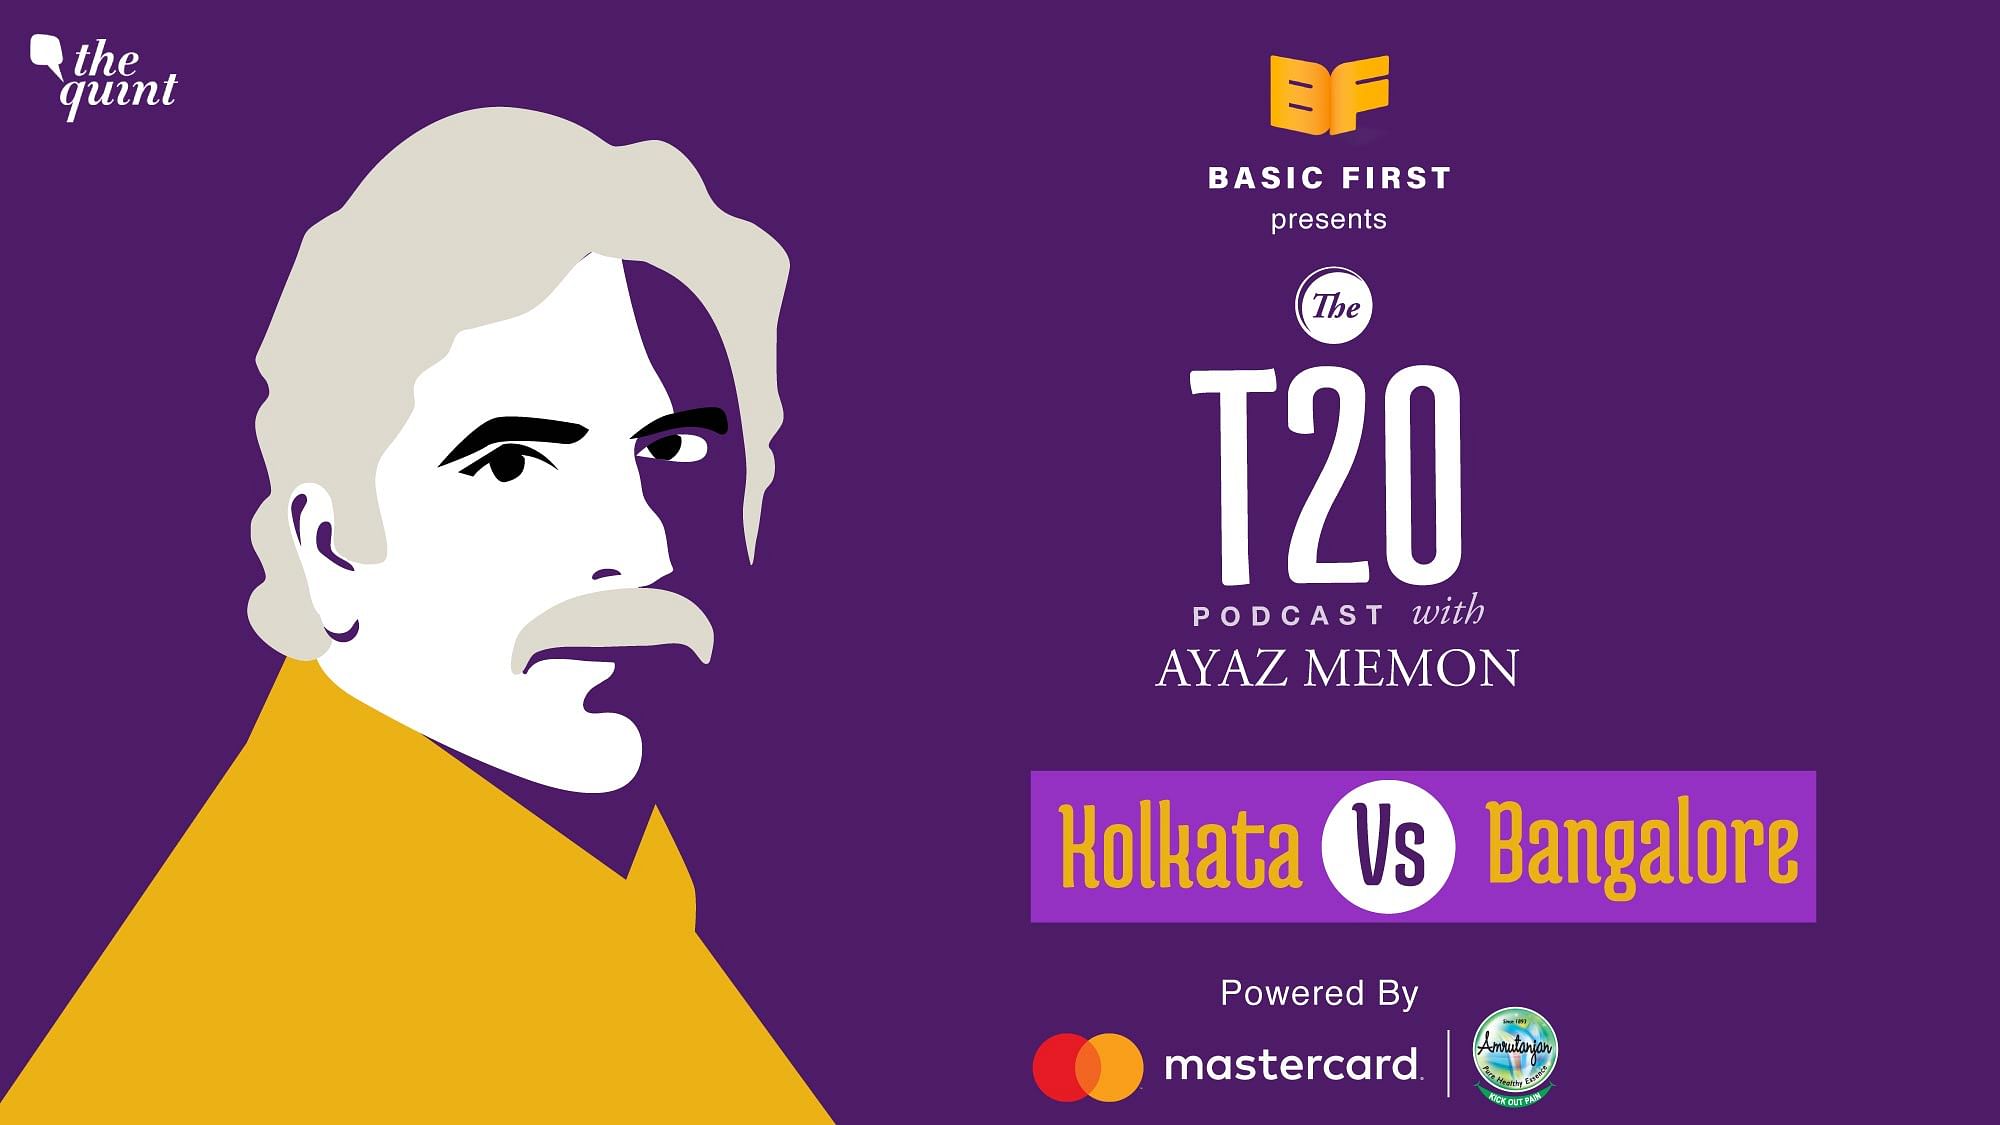 On Episode 28 of The T20 Podcast, Ayaz Memon and Mendra Dorjey talk about Bangalore’s 82-run victory over Kolkata in Sharjah on Monday night.